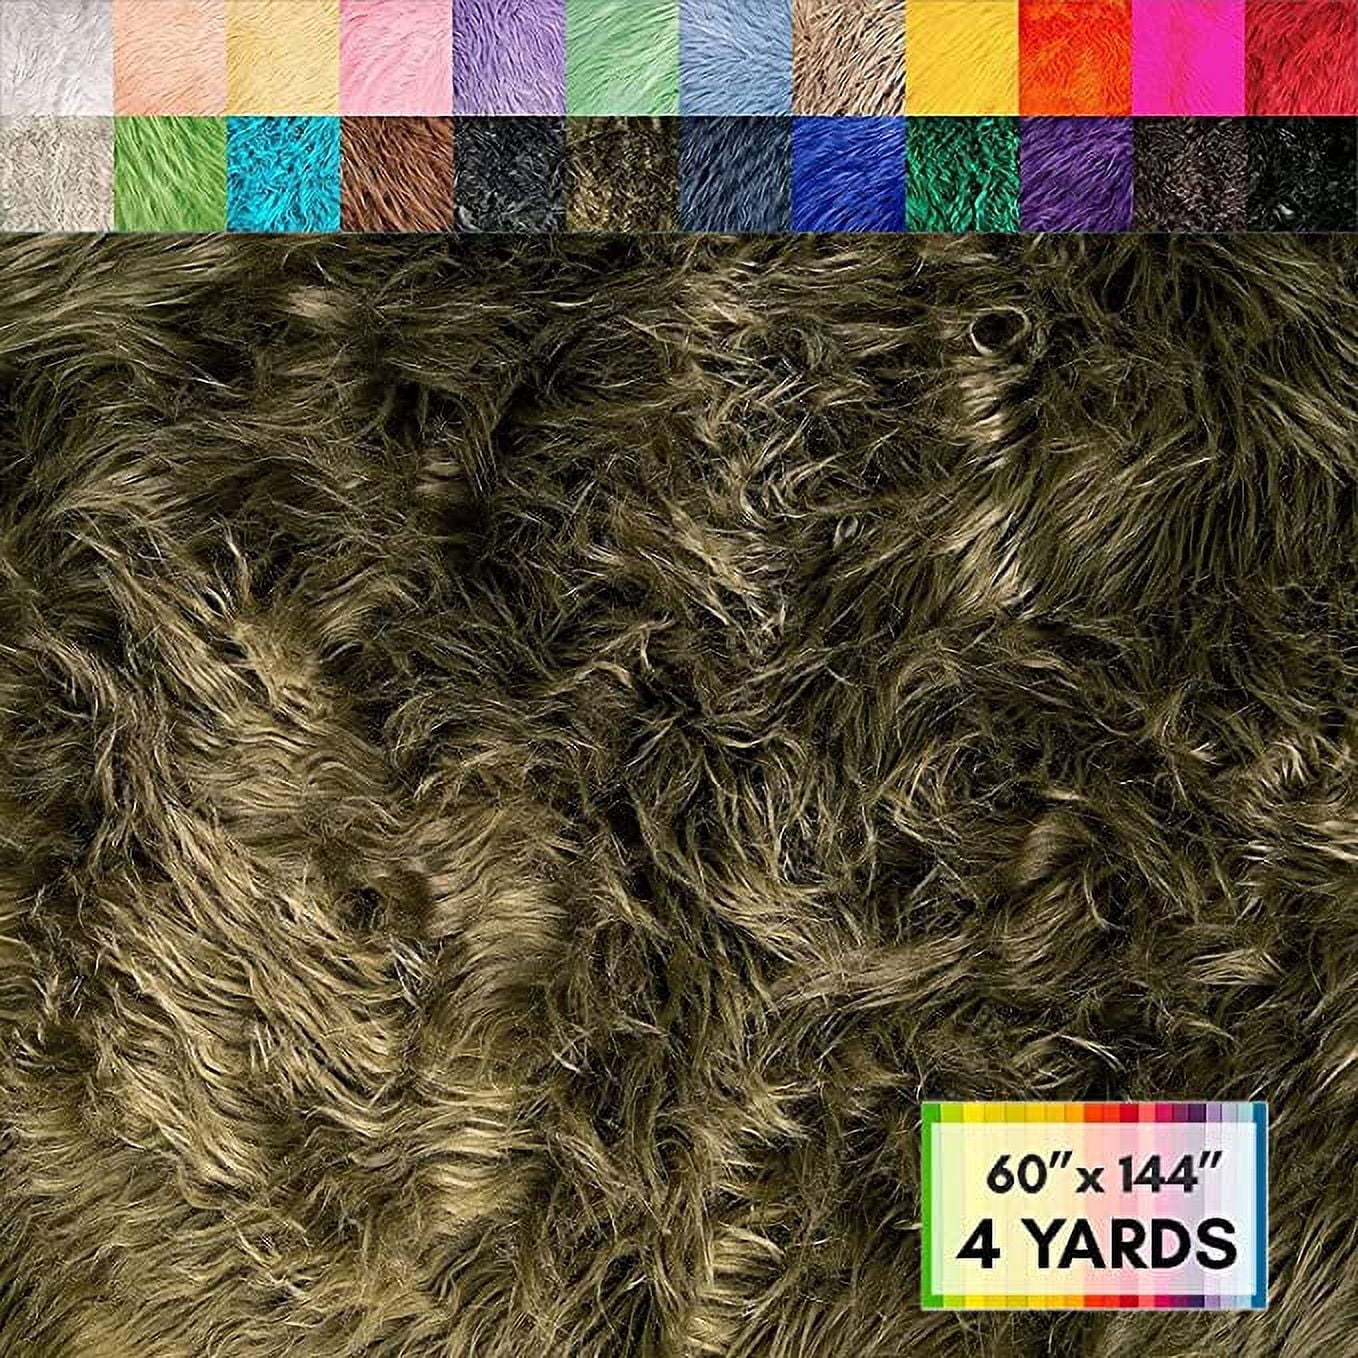 FabricLA Shaggy Faux Fur by The Yard | 144 inch x 60 inch | Craft & Hobby Supply for DIY Coats, Home Decor, Apparel, Vests, Jackets, Rugs, Throw